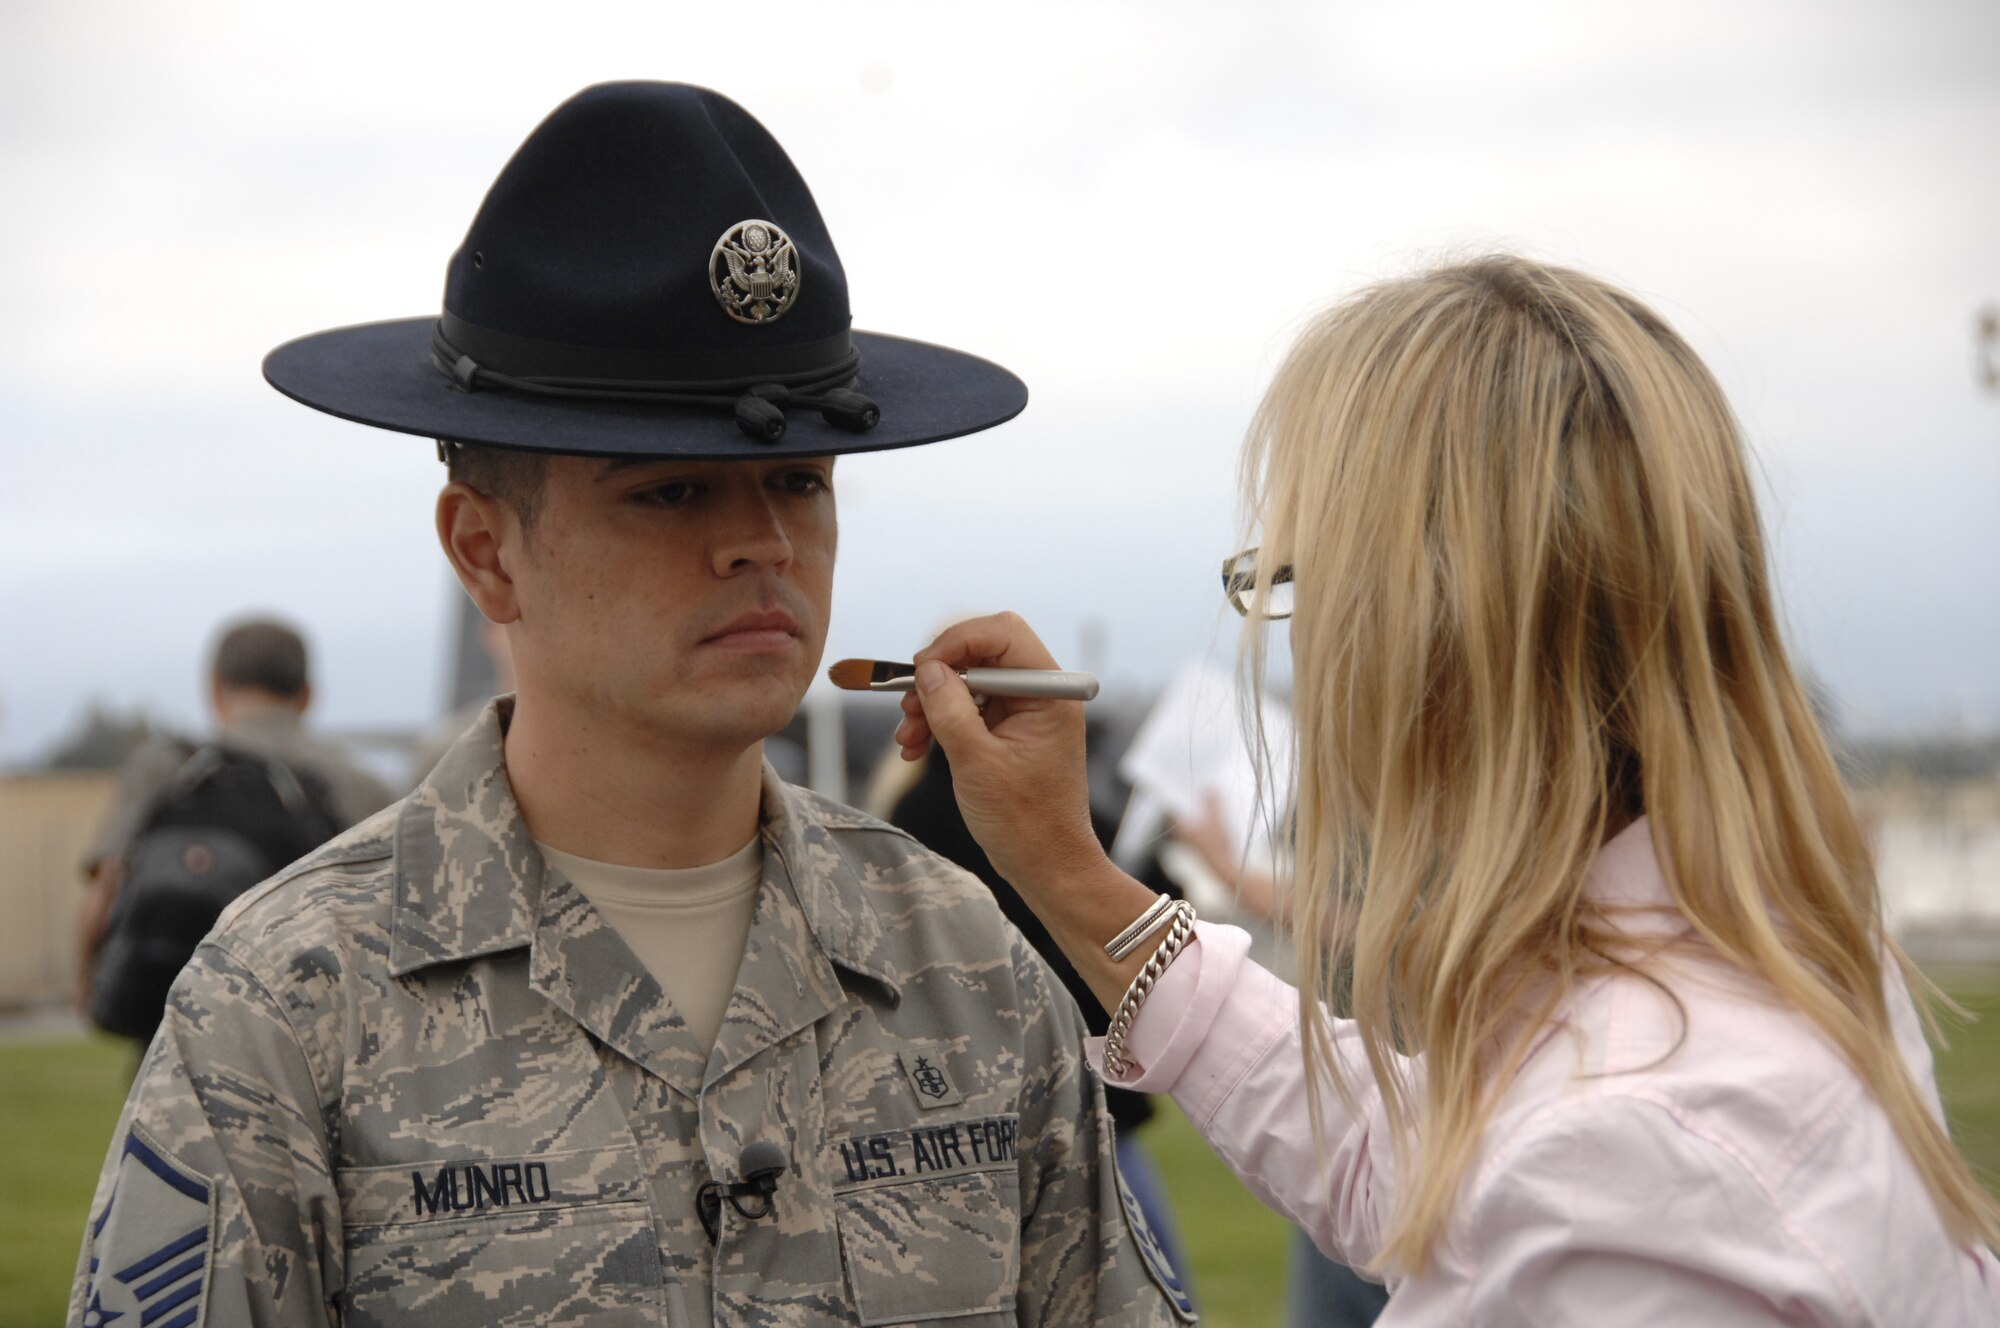 Master Sgt. Alan Munro, a former military training instructor and a member of the 129th Medical Group, has make-up applied by make-up artist, Pauline Berry, during a photo shoot for the redesign of GoANG.com at Moffett Federal Airfield, Calif., Aug. 1, 2009.  (Air National Guard photo by Tech. Sgt. Ray Aquino)